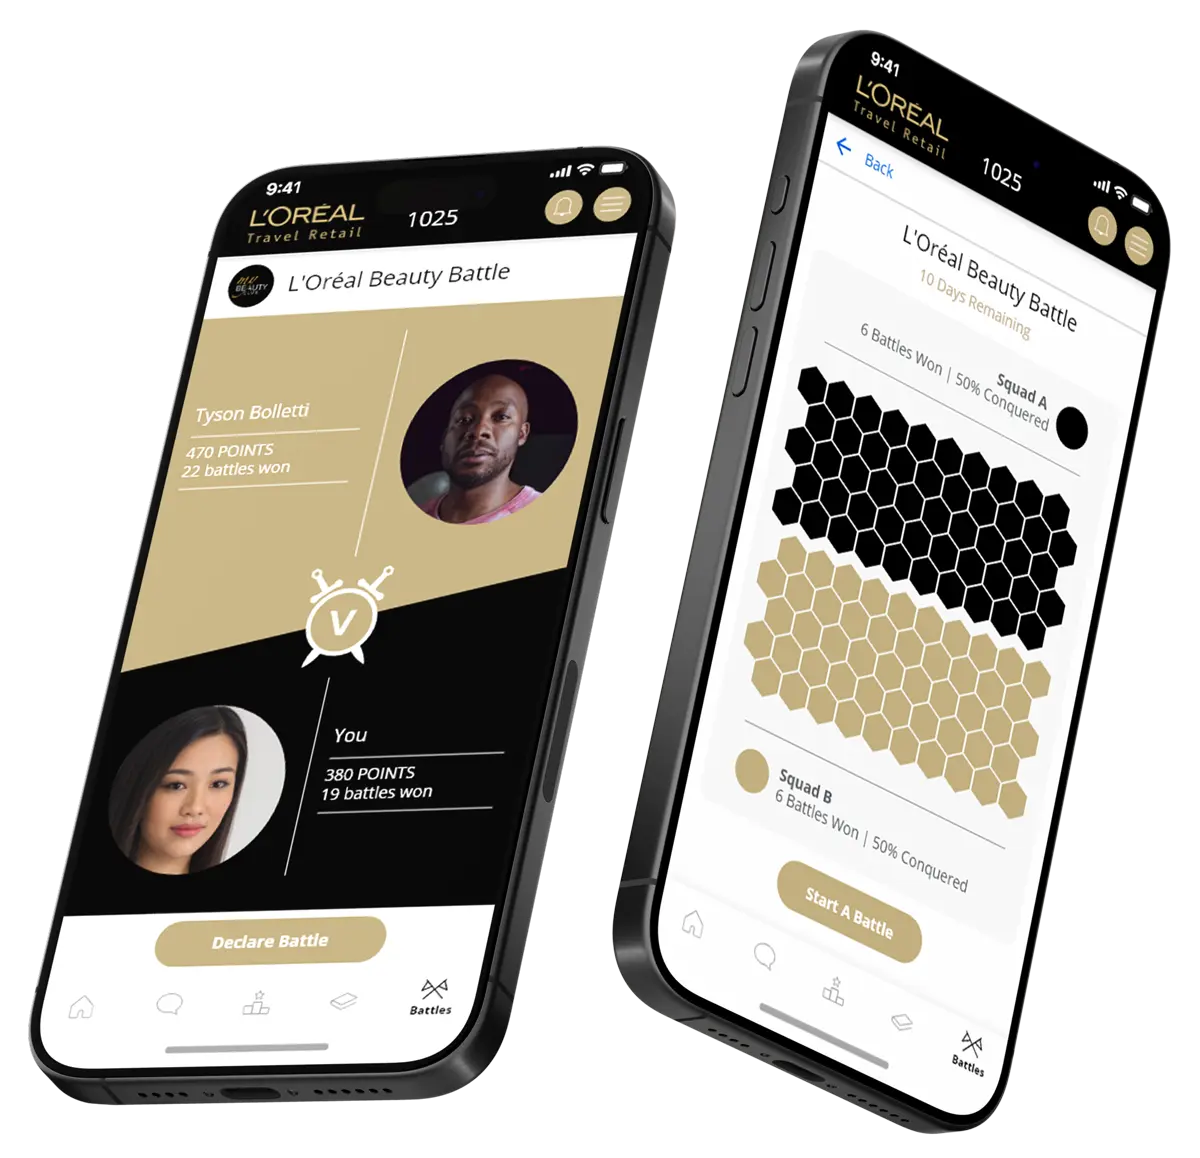 L'Oréal Travel Retail My Beauty Club - Floating Phone Mock-up